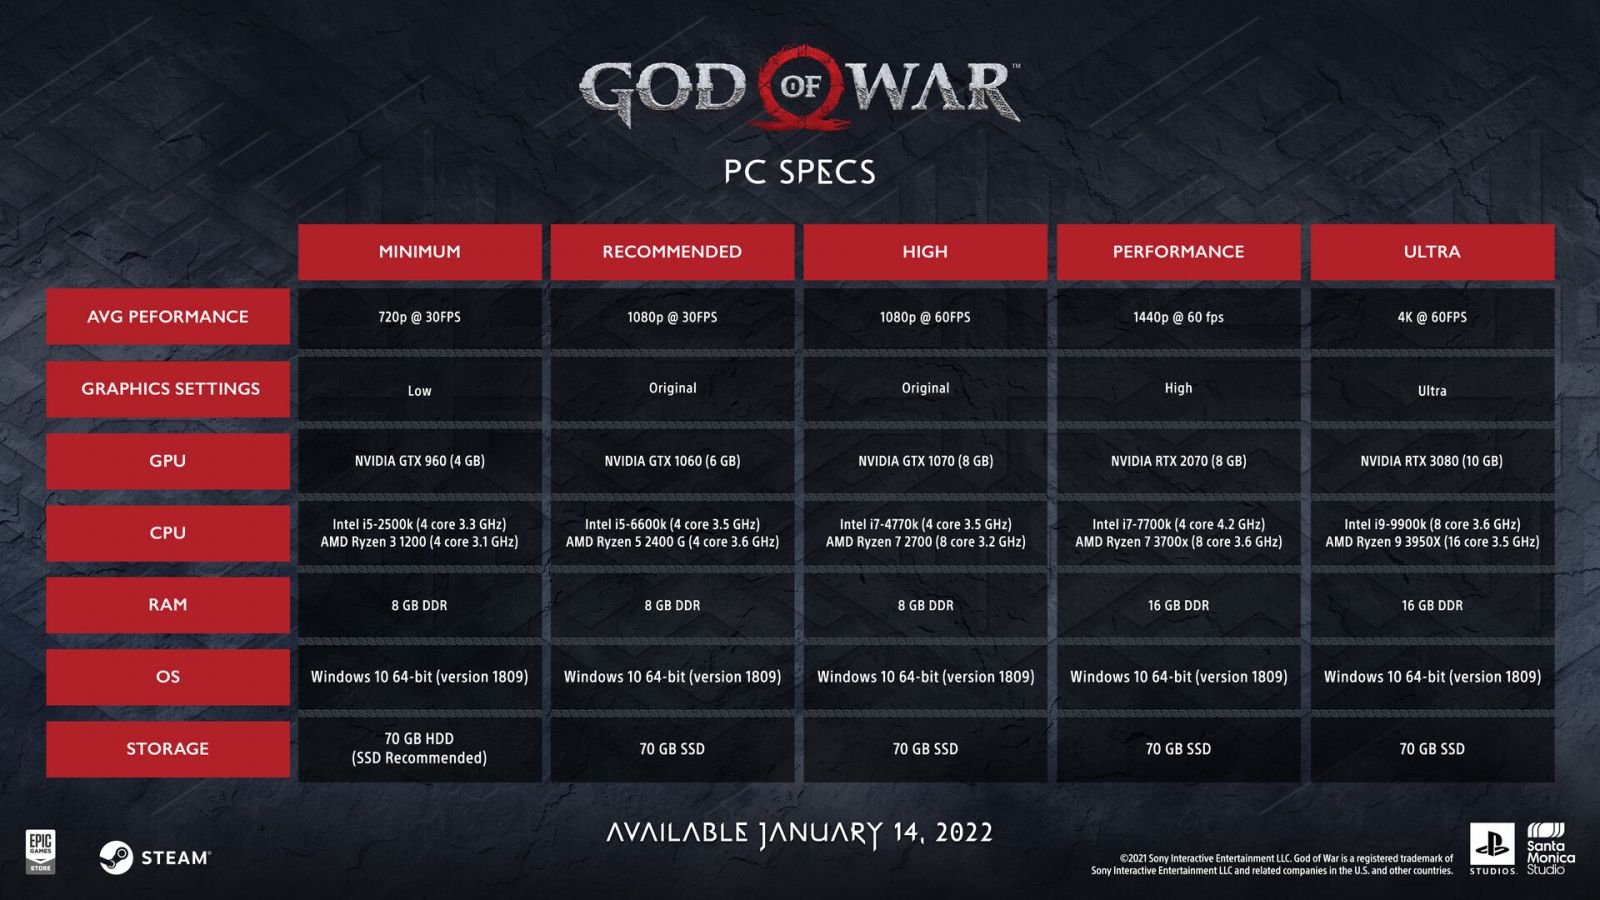 csm_God_of_War_PC_requirements_table_9744a54ded.jpg